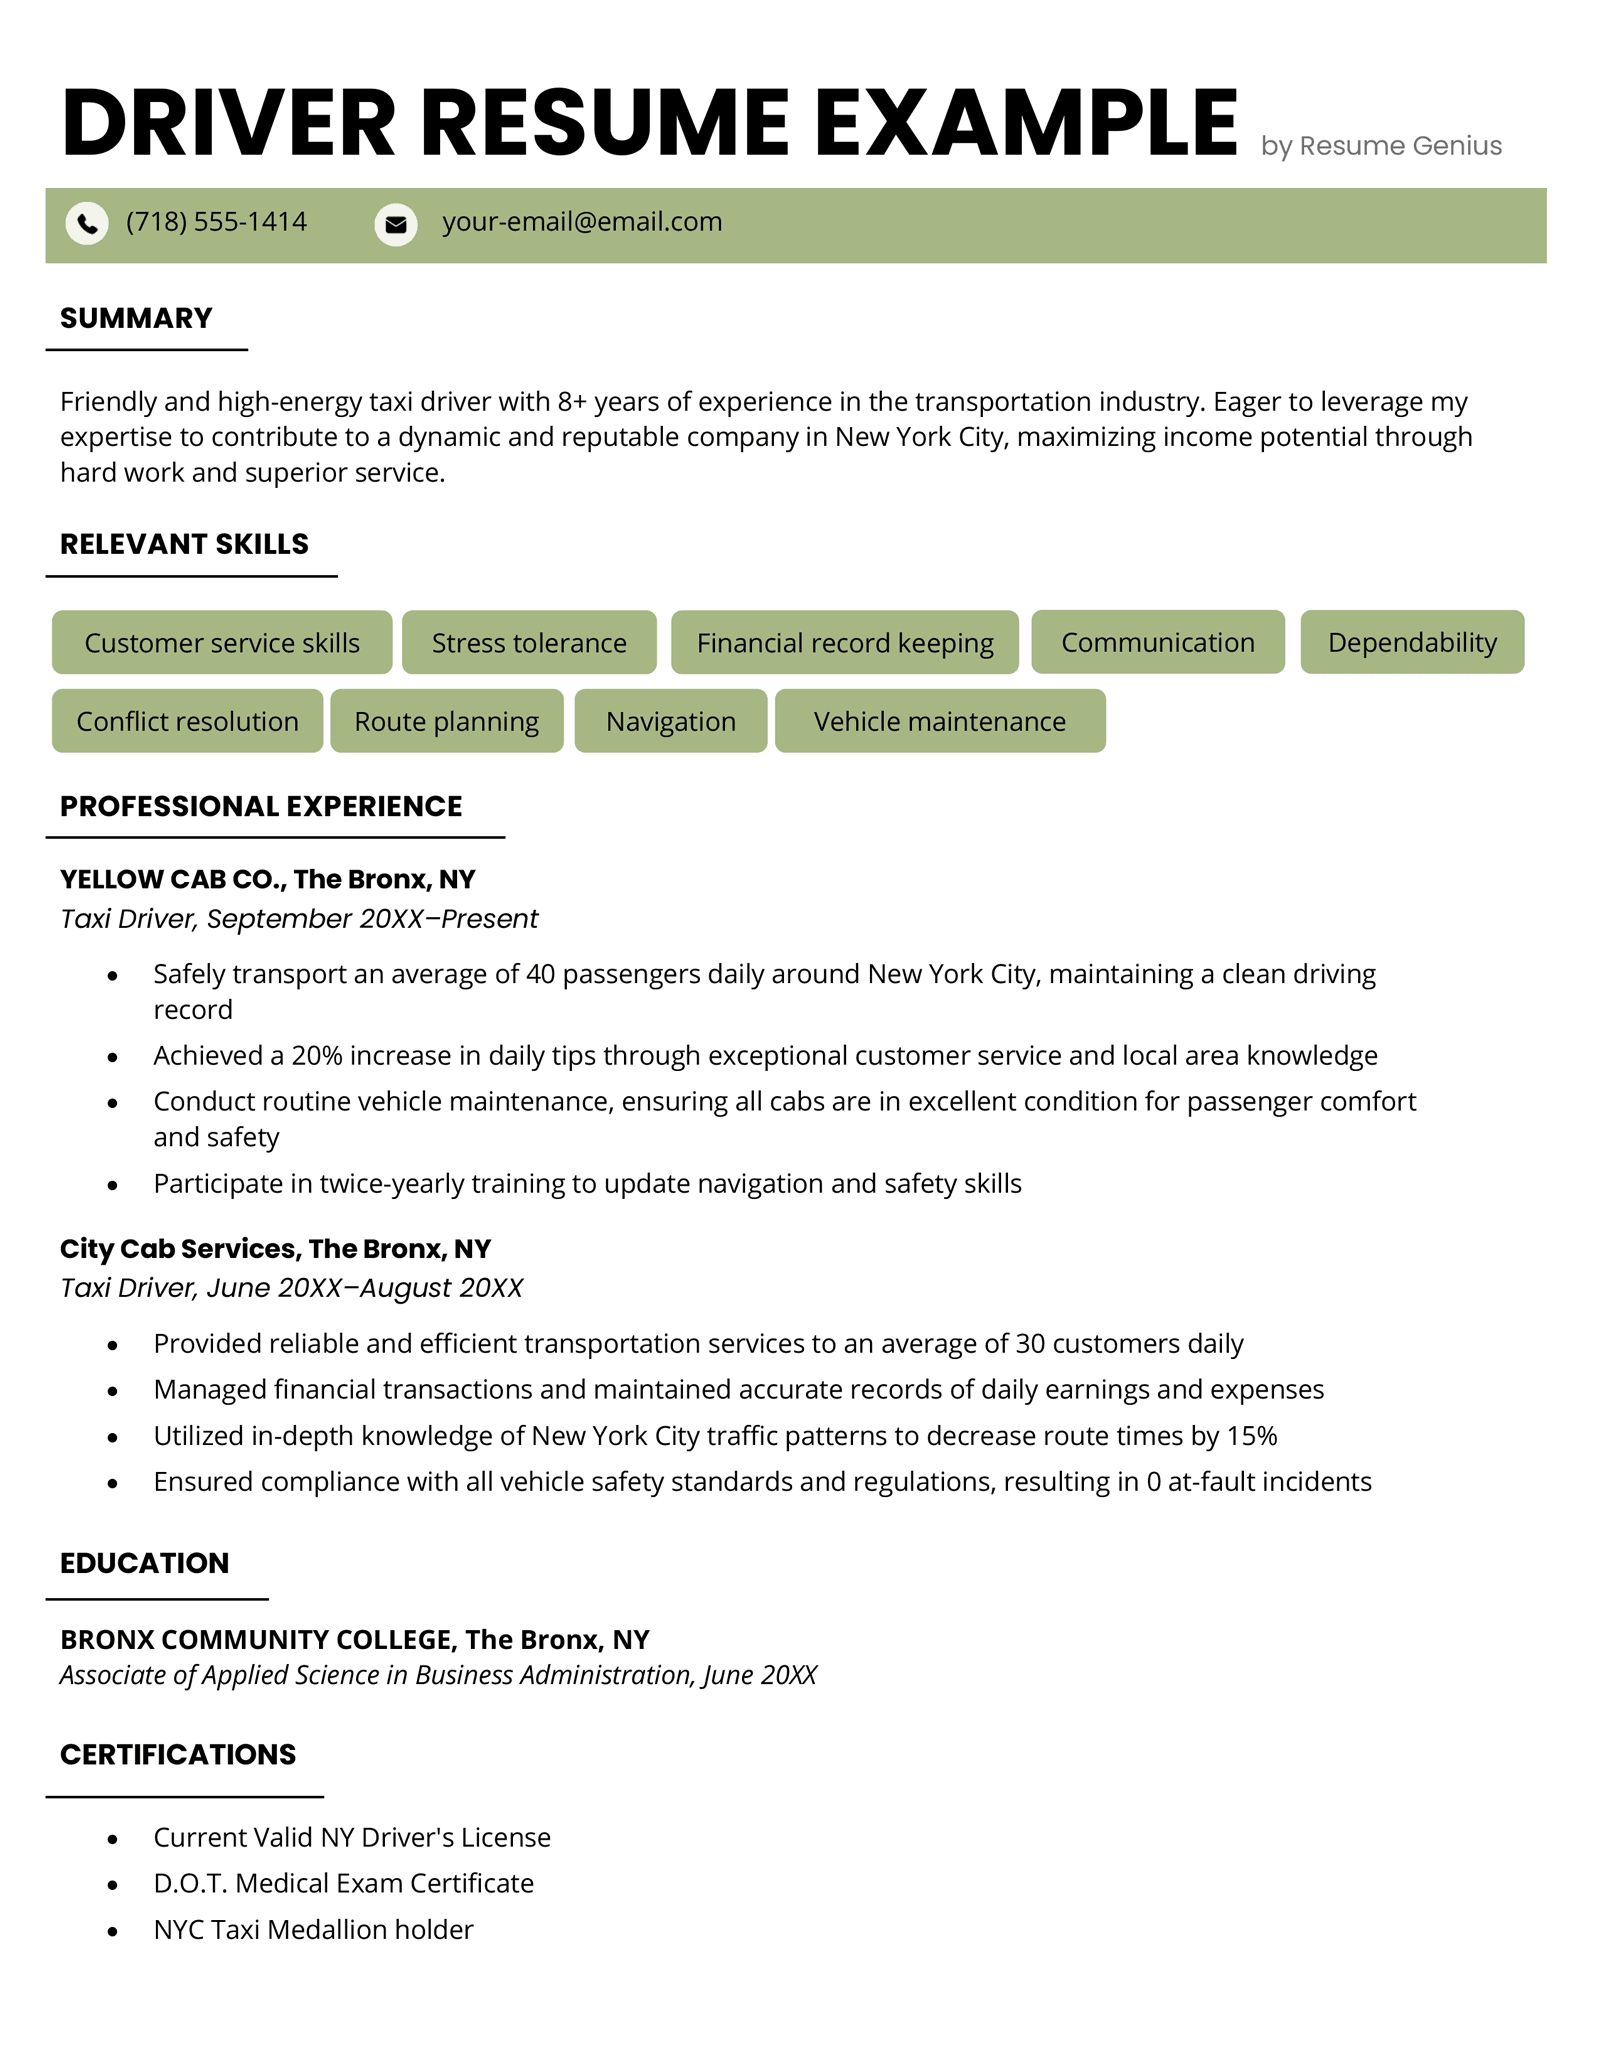 A taxi driver resume in a green color scheme for a taxi driver who has worked in The Bronx for several years.